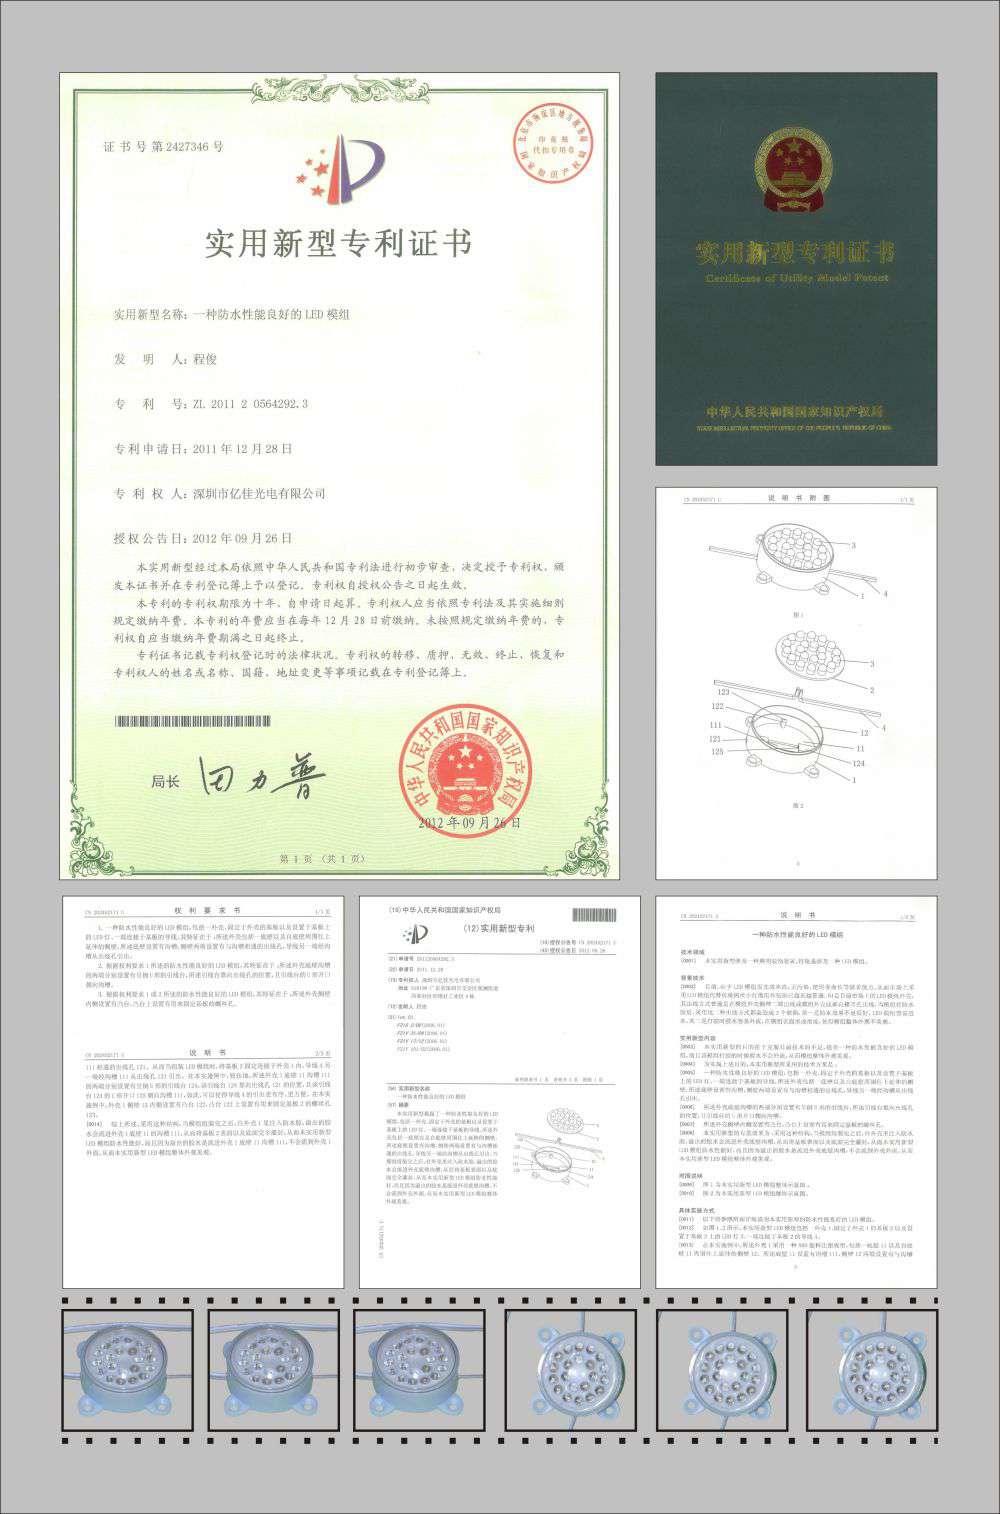 Aglare Lighing's patent for LED outdoor waterproof advertising module